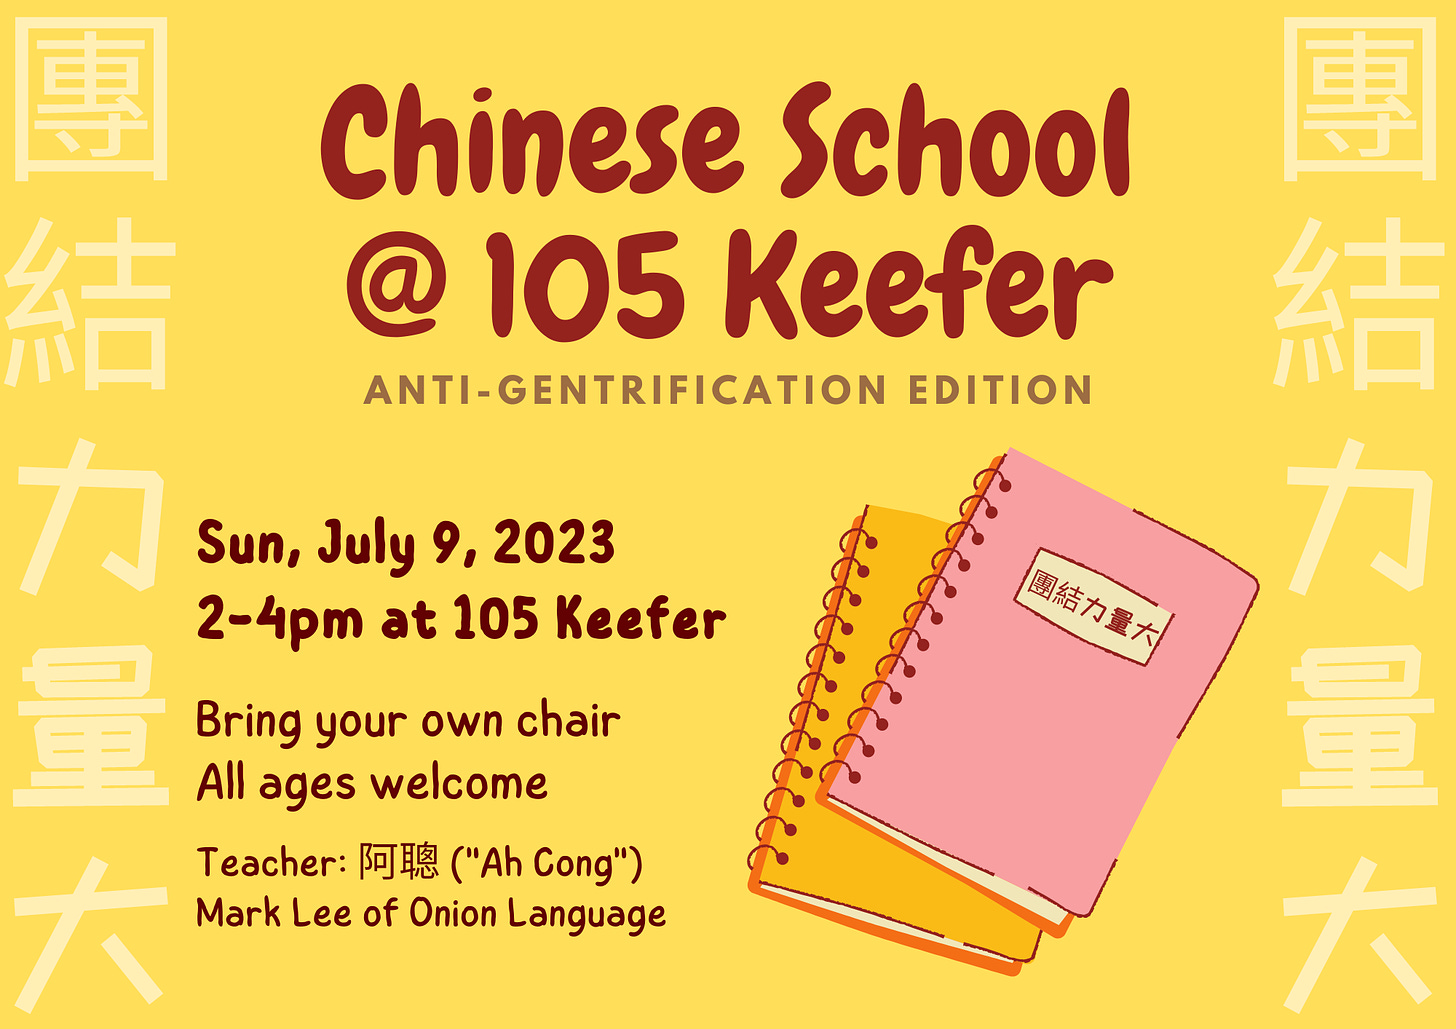 Chinese School at 105 Keefer